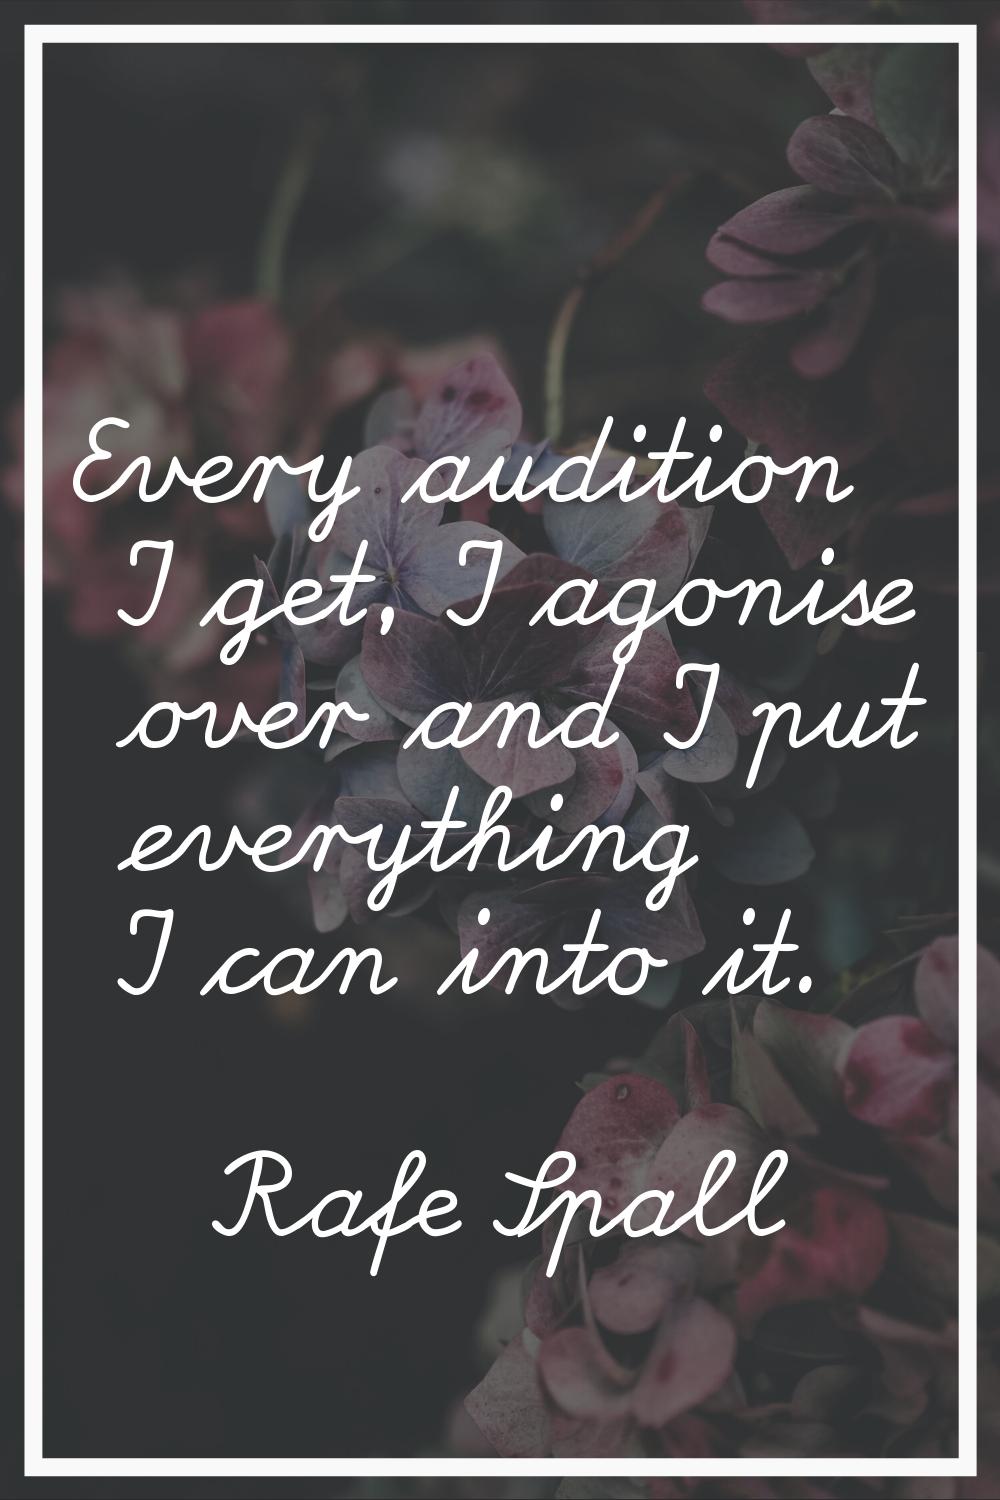 Every audition I get, I agonise over and I put everything I can into it.